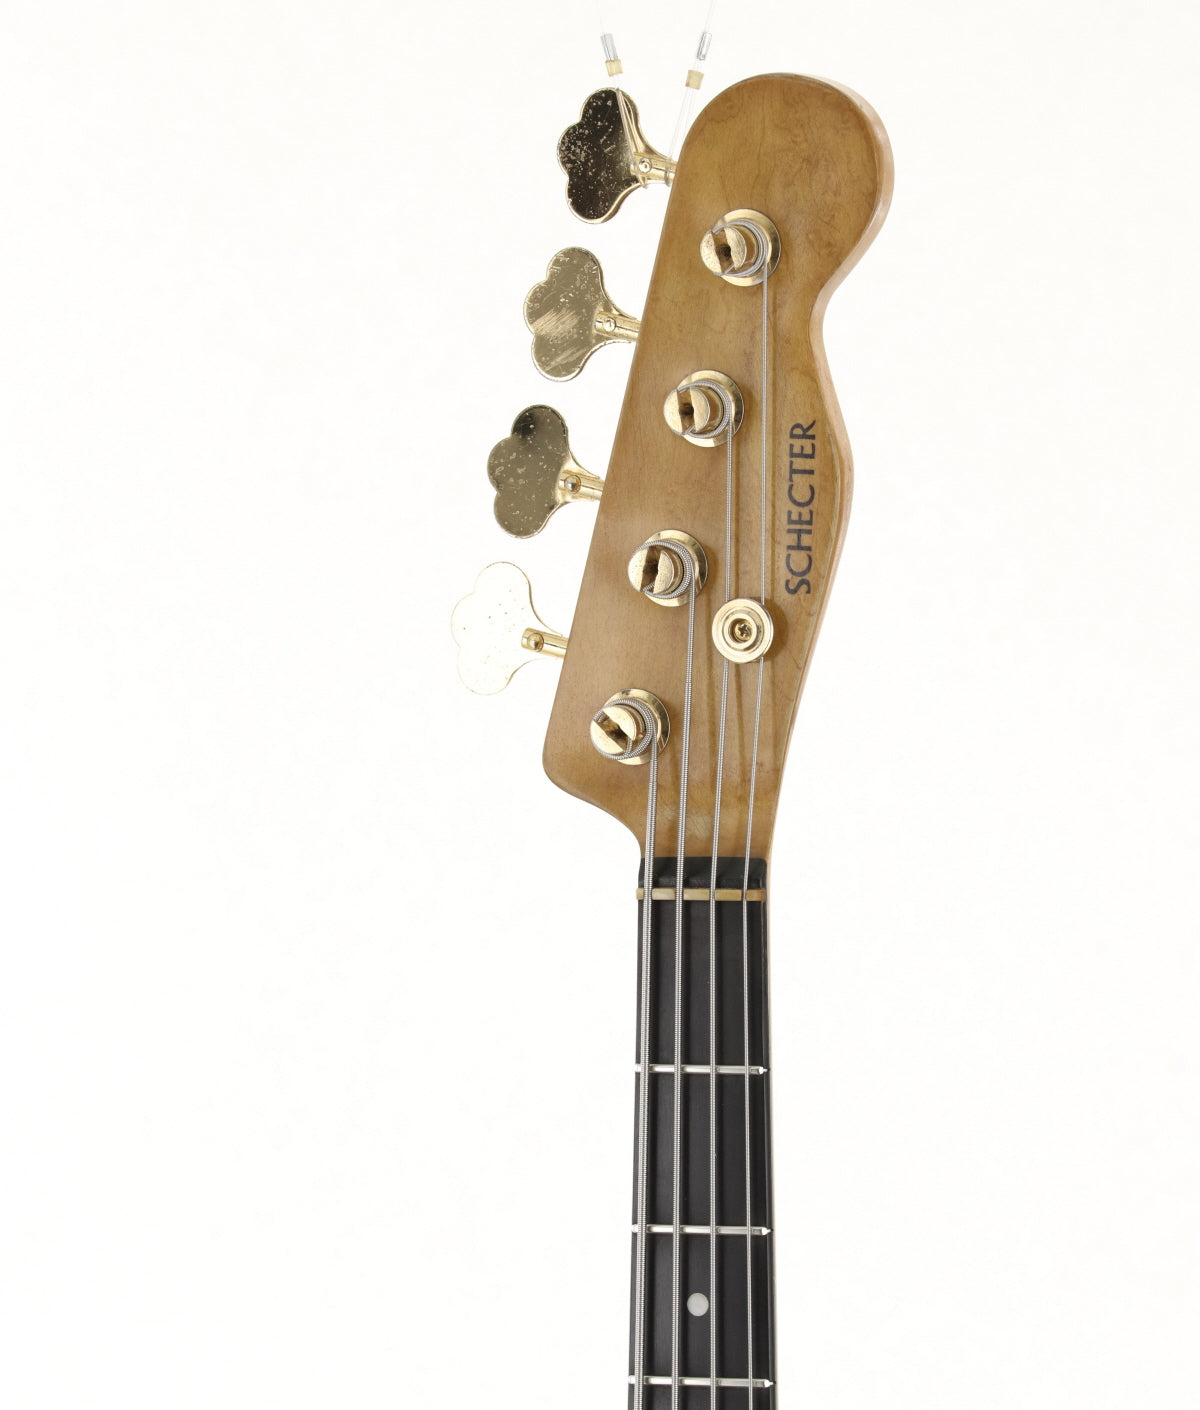 [SN 91648] USED SCHECTER / TL BASS TYPE ORDER Model [03]